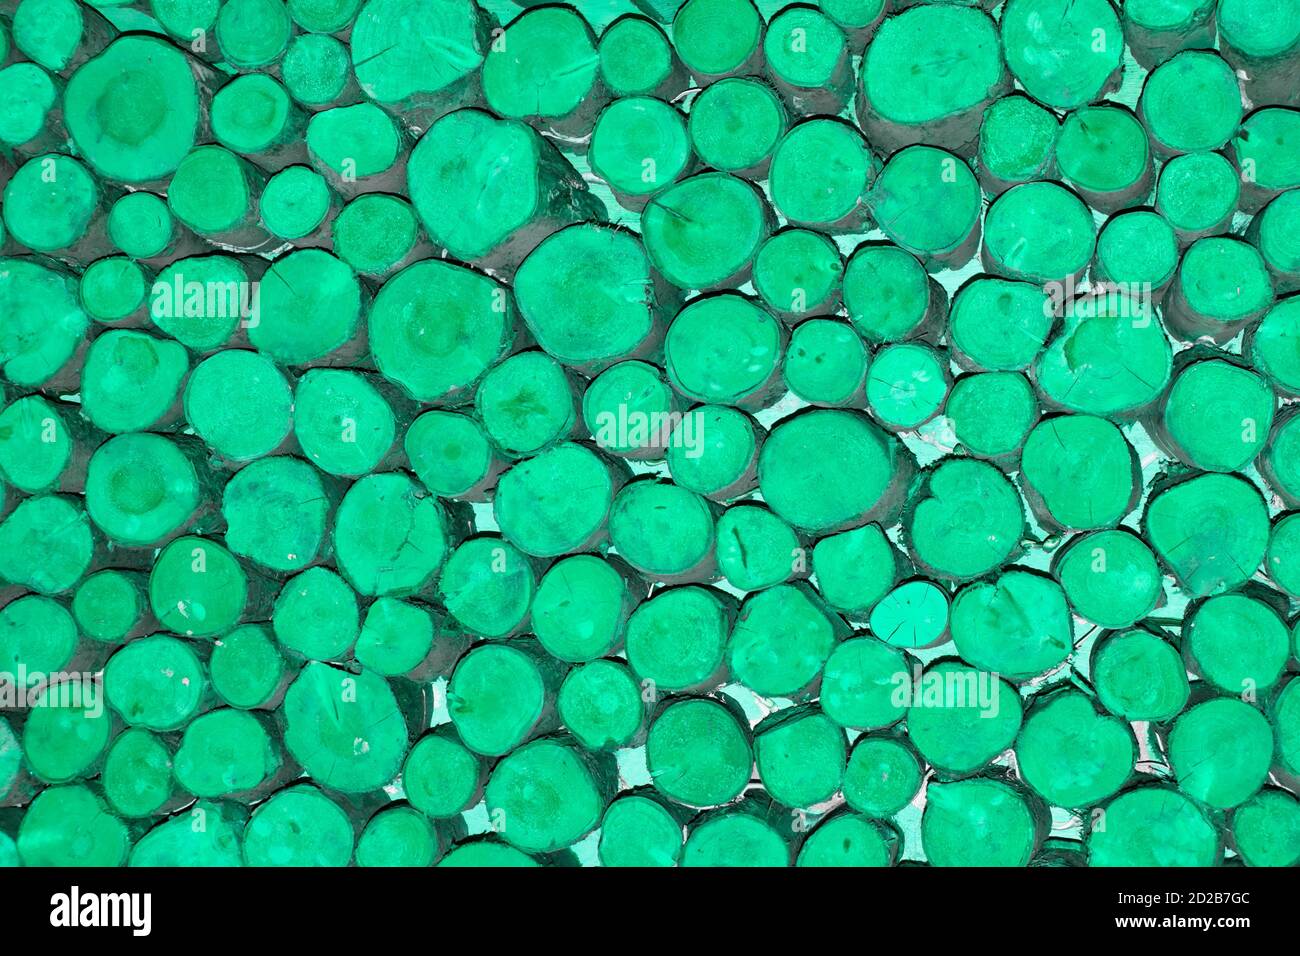 Abstract background pattern image manipulated green colour applied to ends of stacked short lengths random diameter round sawn timber logs England UK Stock Photo